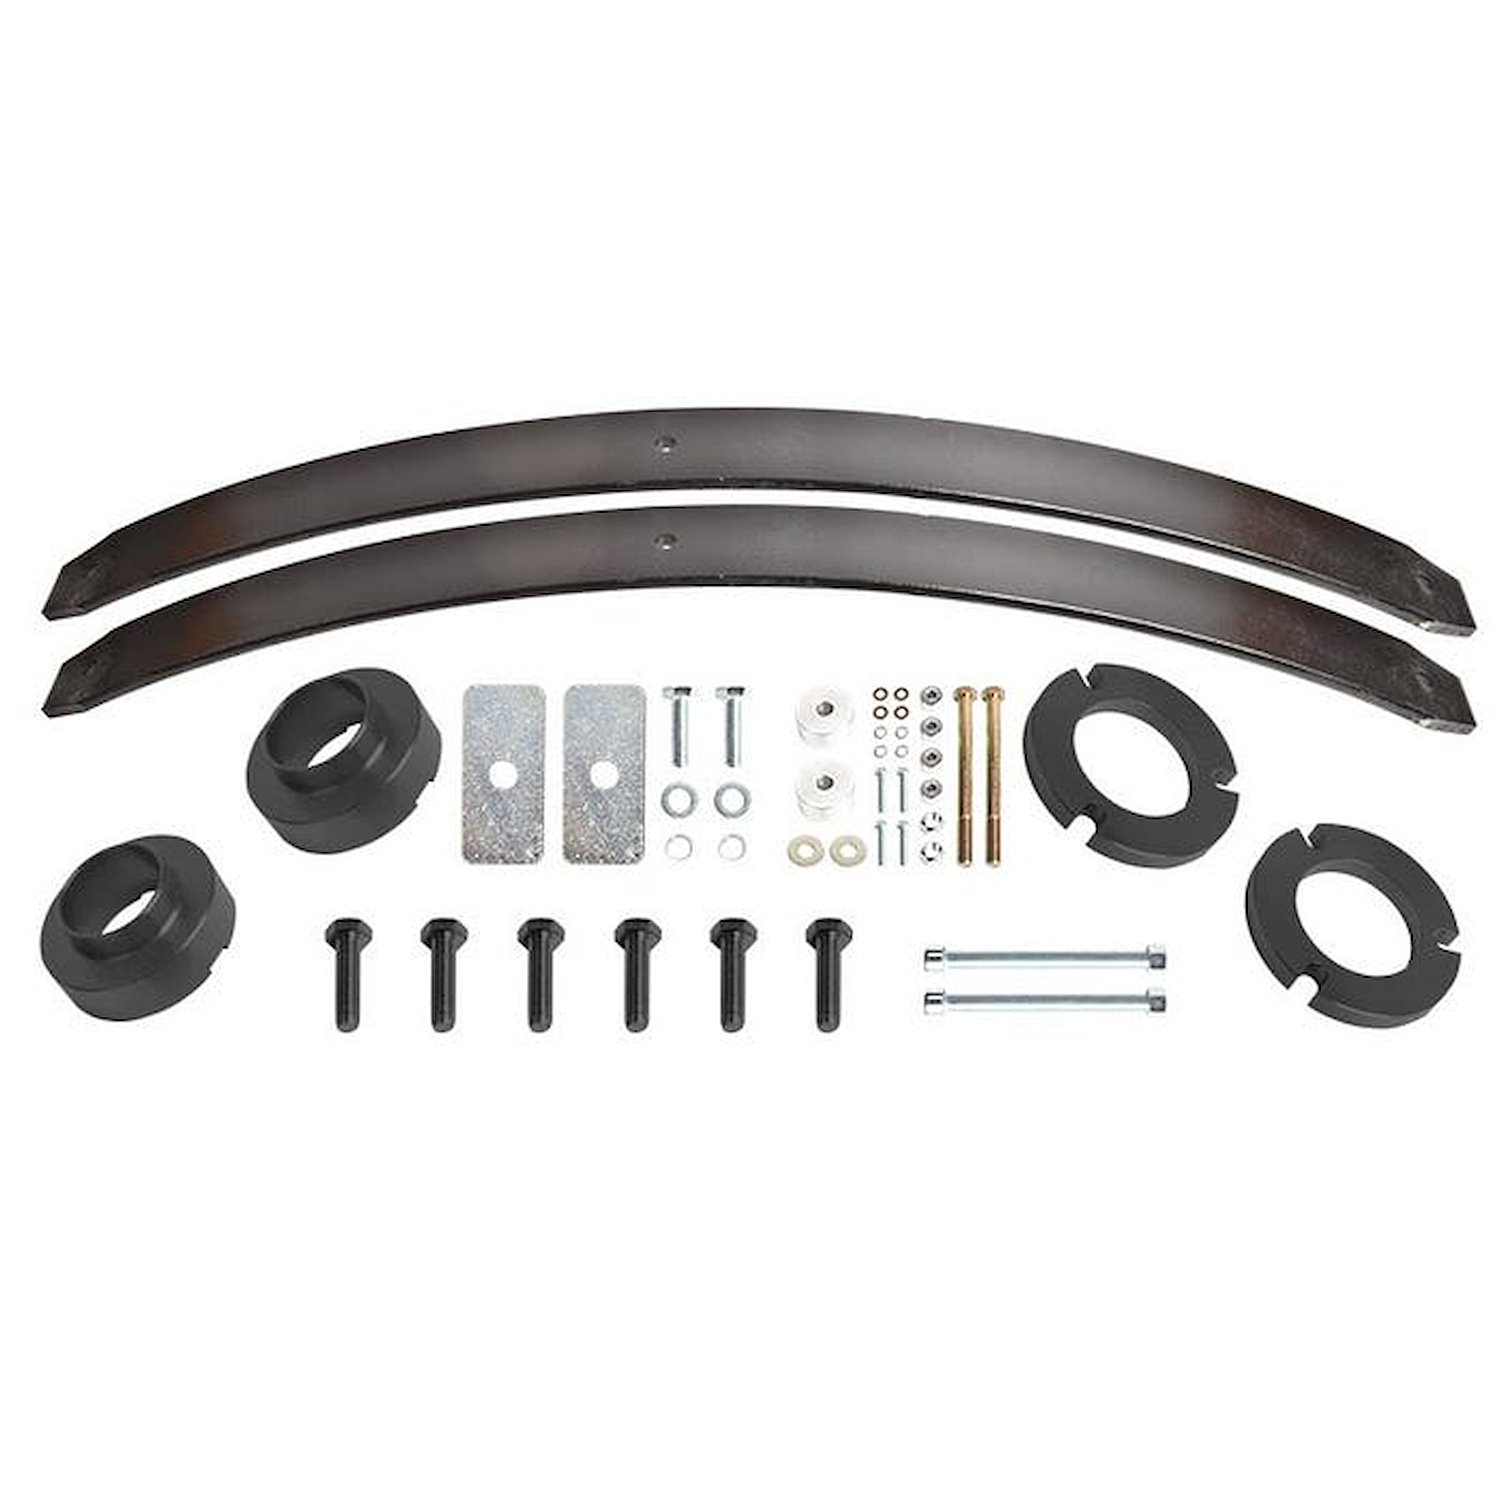 300513-1-KIT Complete Front And Rear Lift Kit, 2005-2015 Tacoma